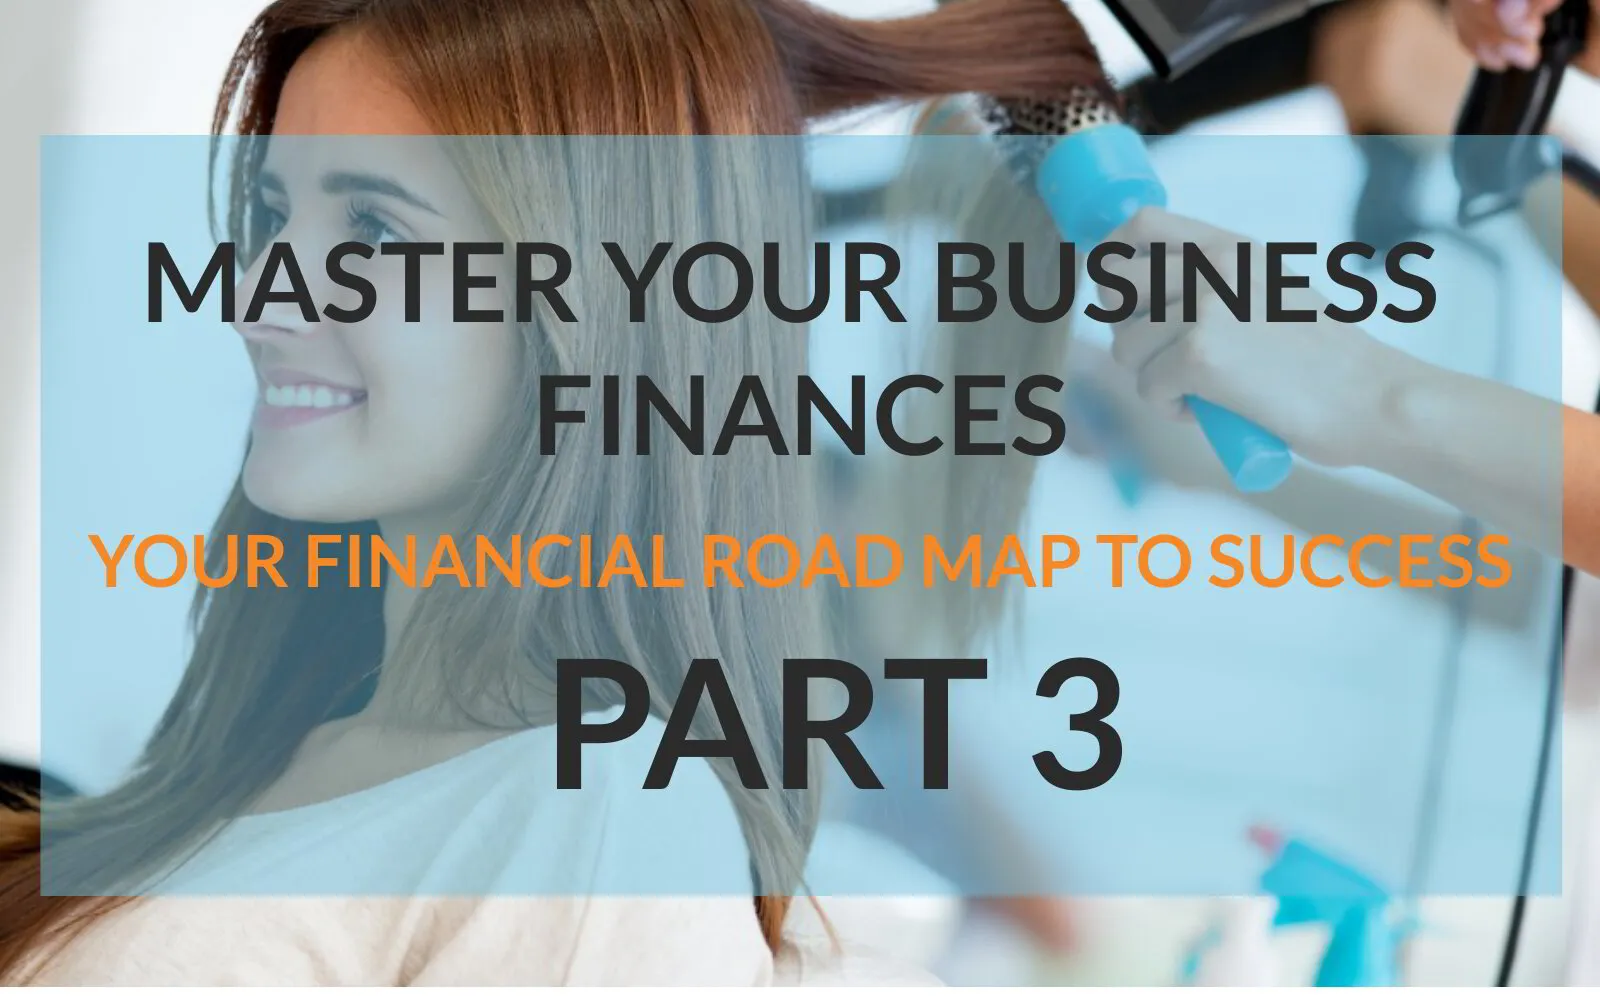 Master Your Business Finances: Your Financial Road Map To Success PART 3